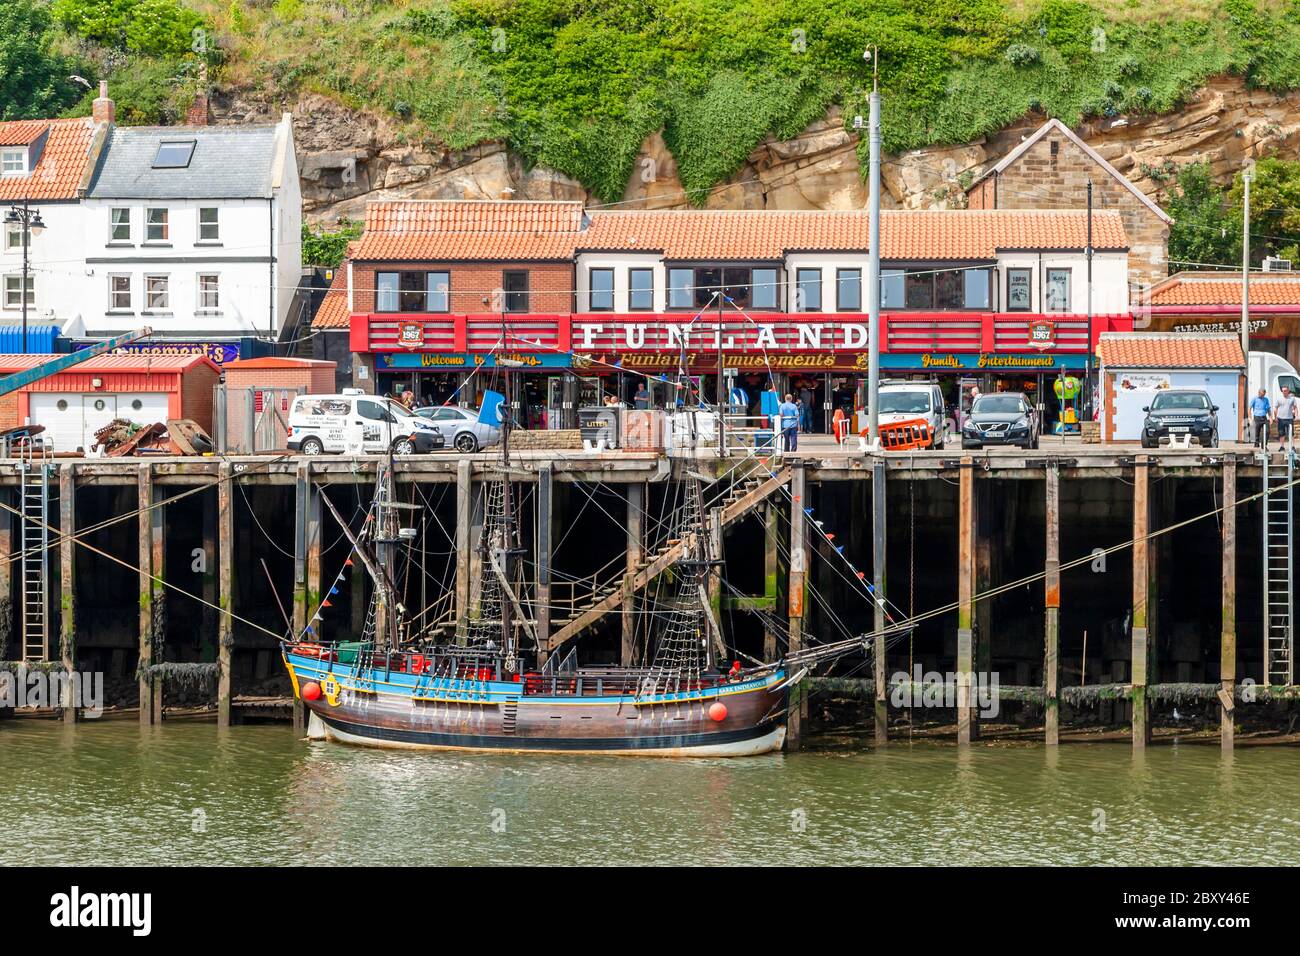 The Funland, Family Entertainment and Millers arcades at Whitby harbor, where the small three-master Bark Endeavour Whitby is moored, Scarborough, England Stock Photo